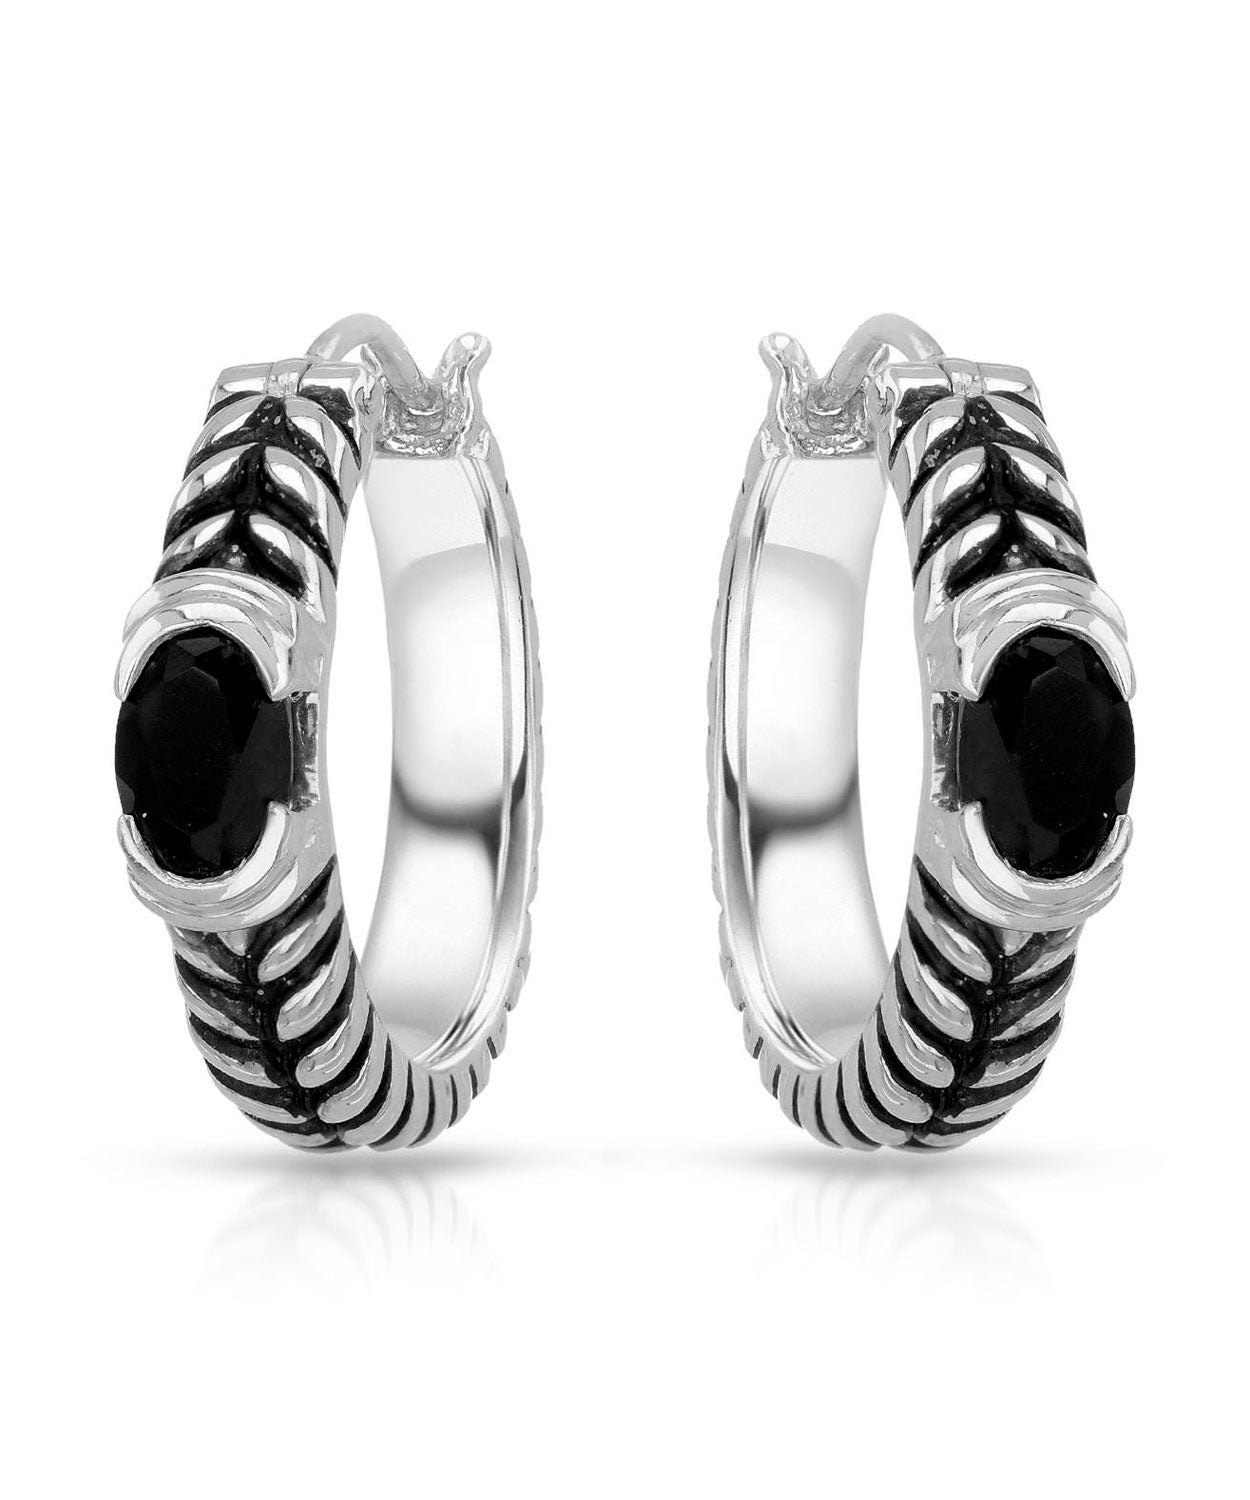 Colore by Simon Golub Natural Black Onyx Rhodium Plated 925 Sterling Silver Hoop Earrings View 1